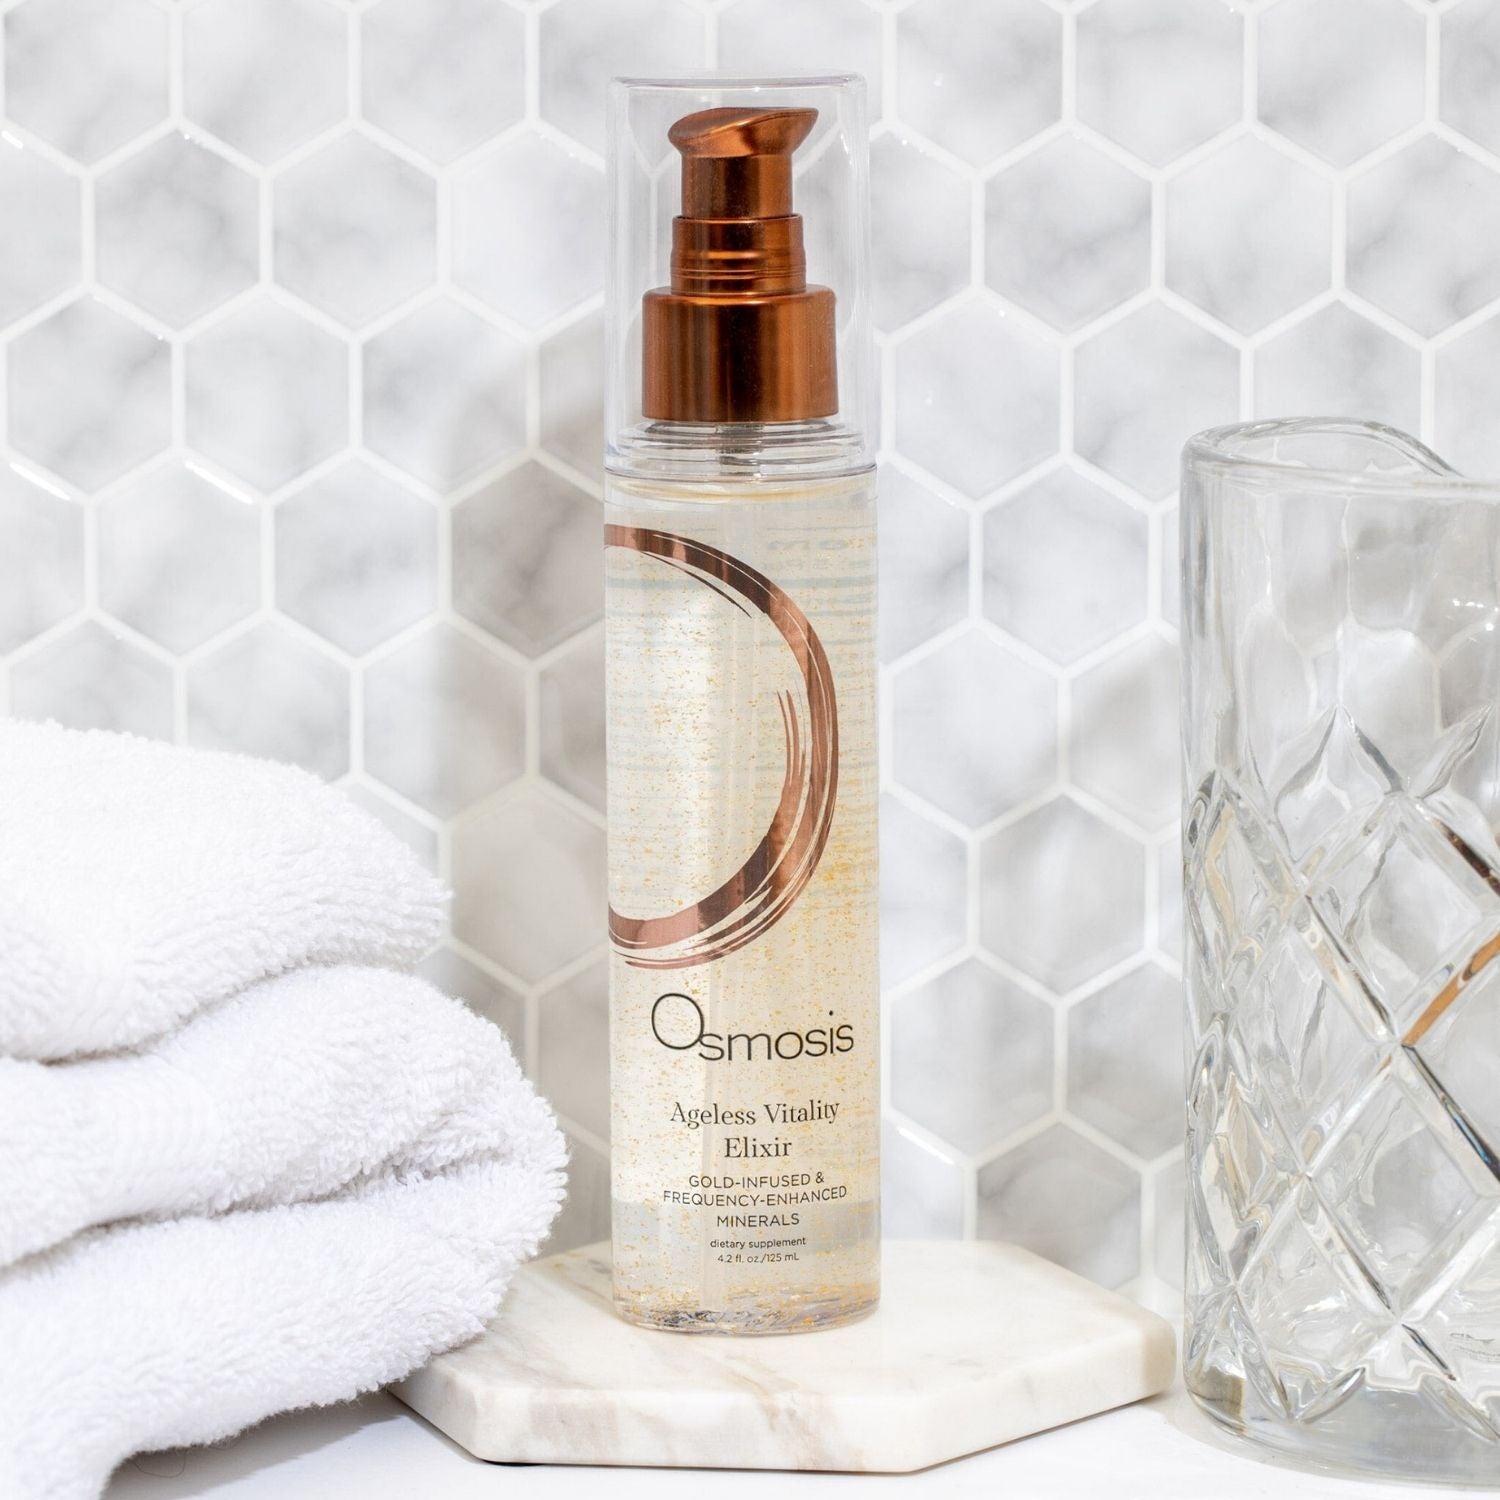 Bottle of Osmosis skincare displayed on counter in a modern white bathroom